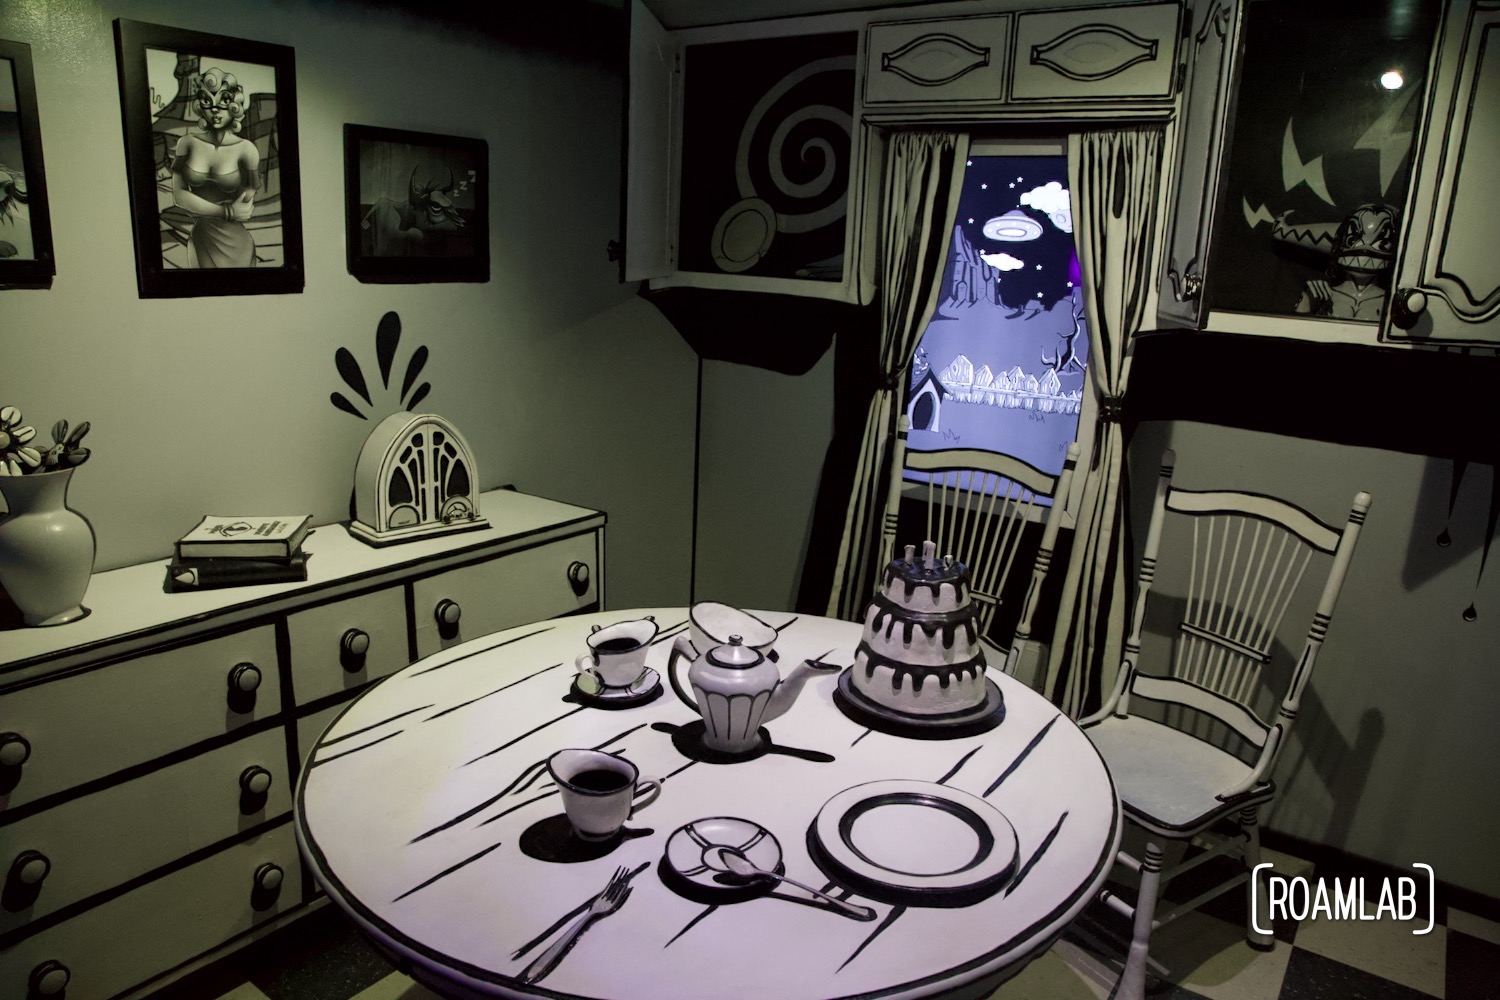 A kitchen scene but in the style of a black and white cartoon at the House of Eternal Return, Meow Wolf's Santa Fe, New Mexico Location